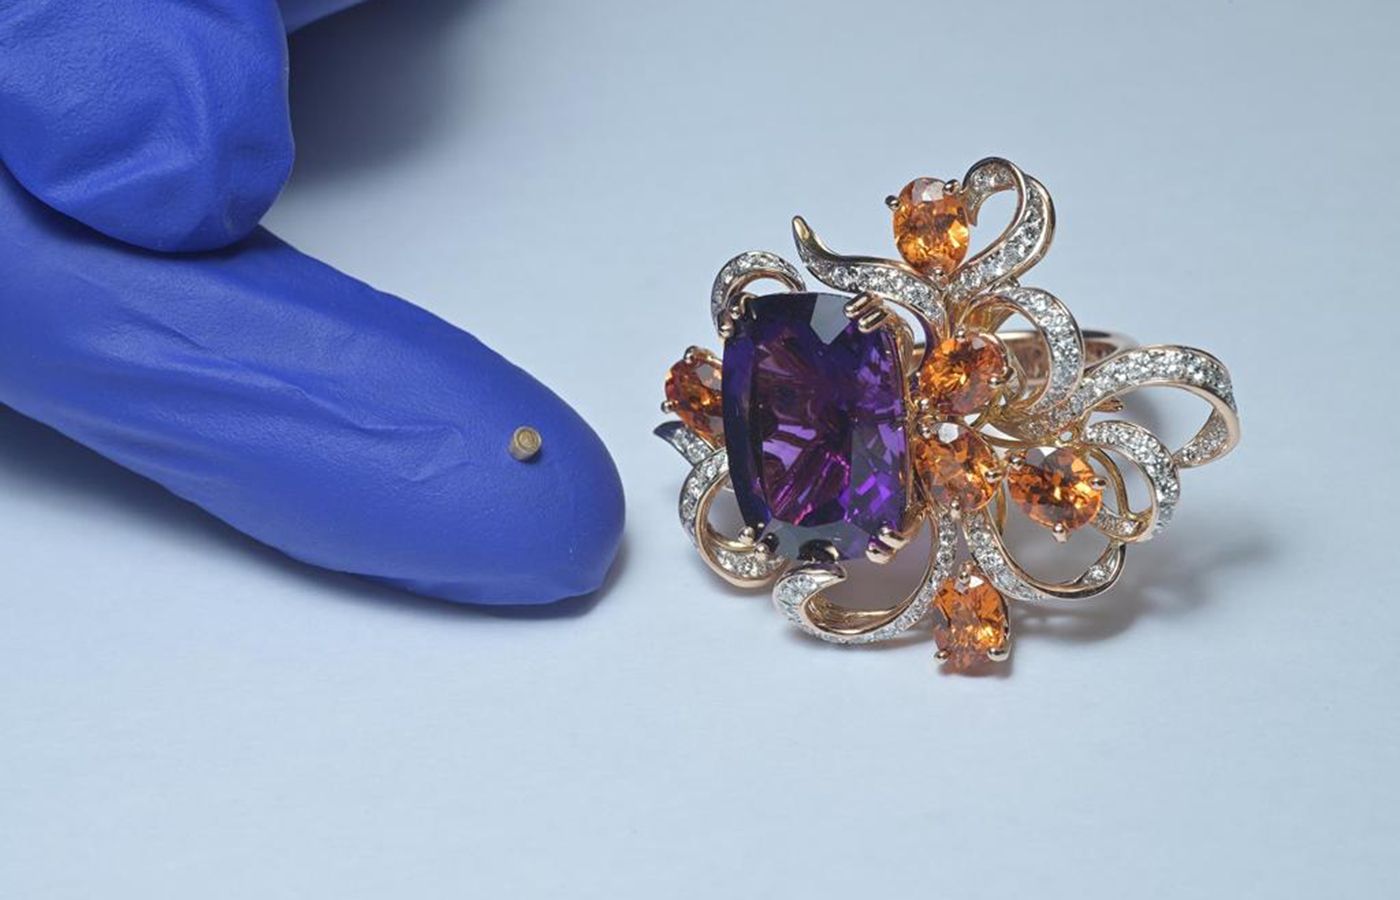 An example of a tiny Caratell RFID micro-chip invented by Michael Koh alongside a ring with Mandarin garnets